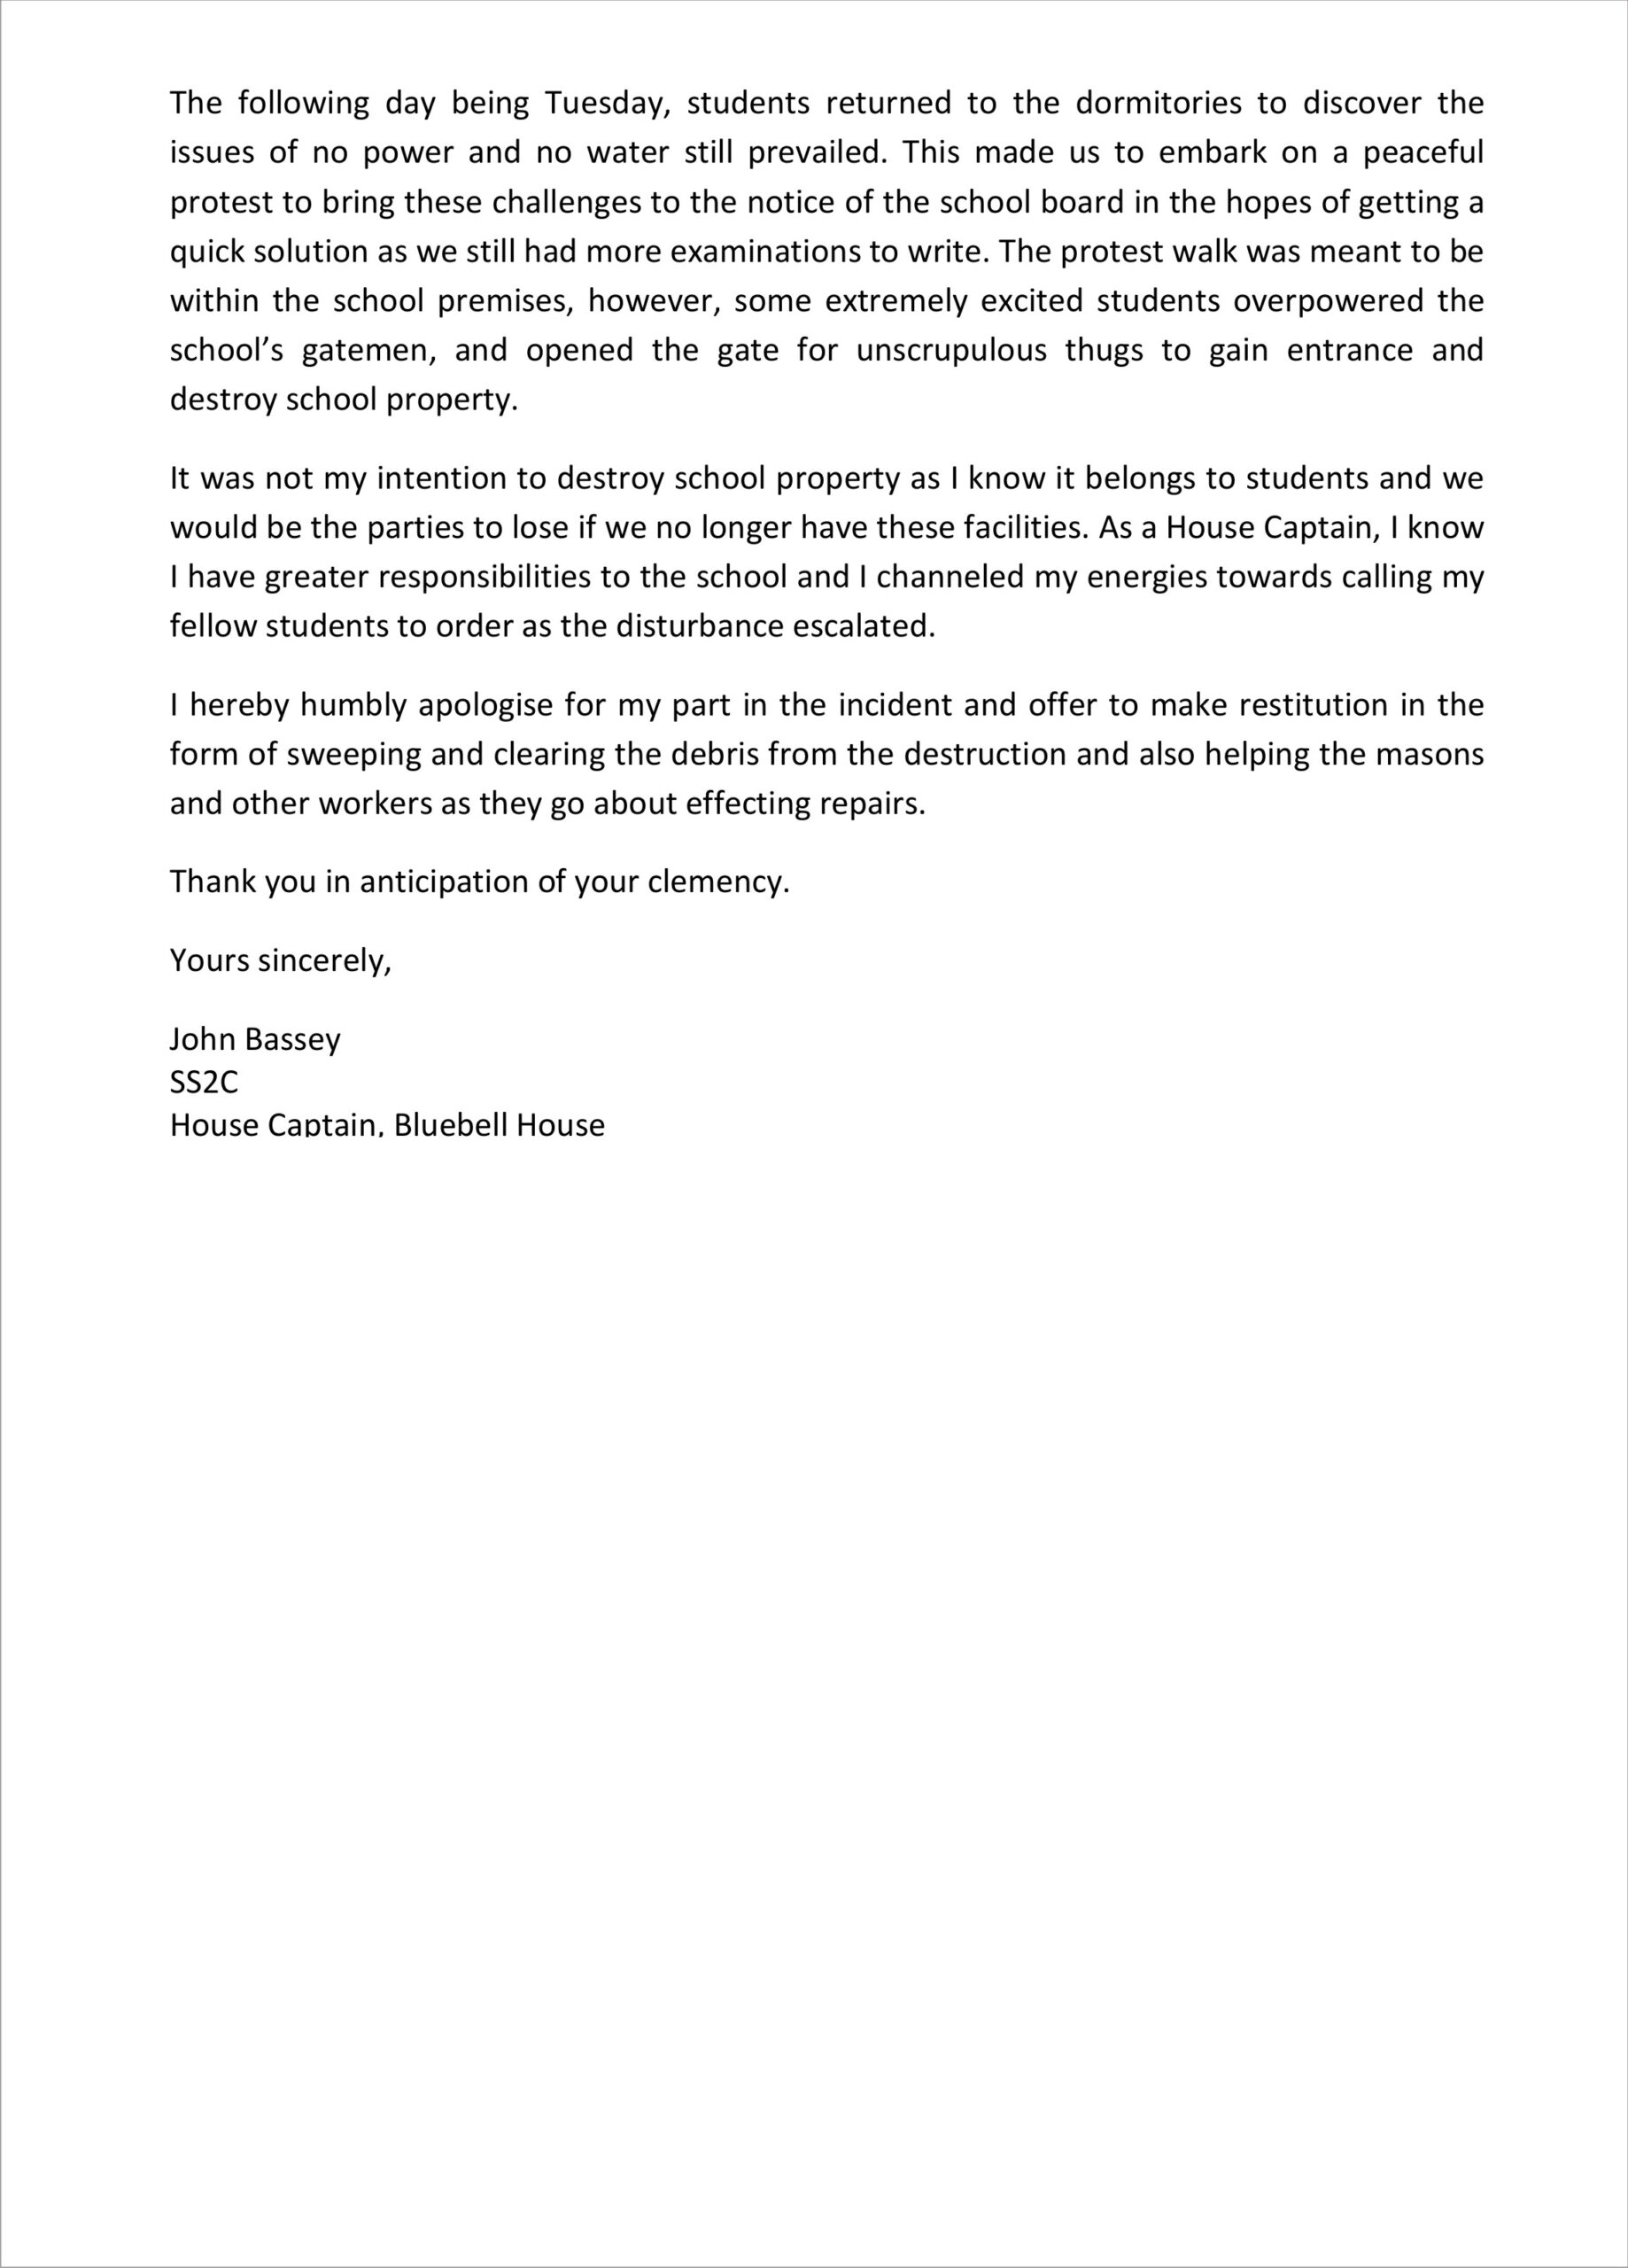 Letter of Apology 2